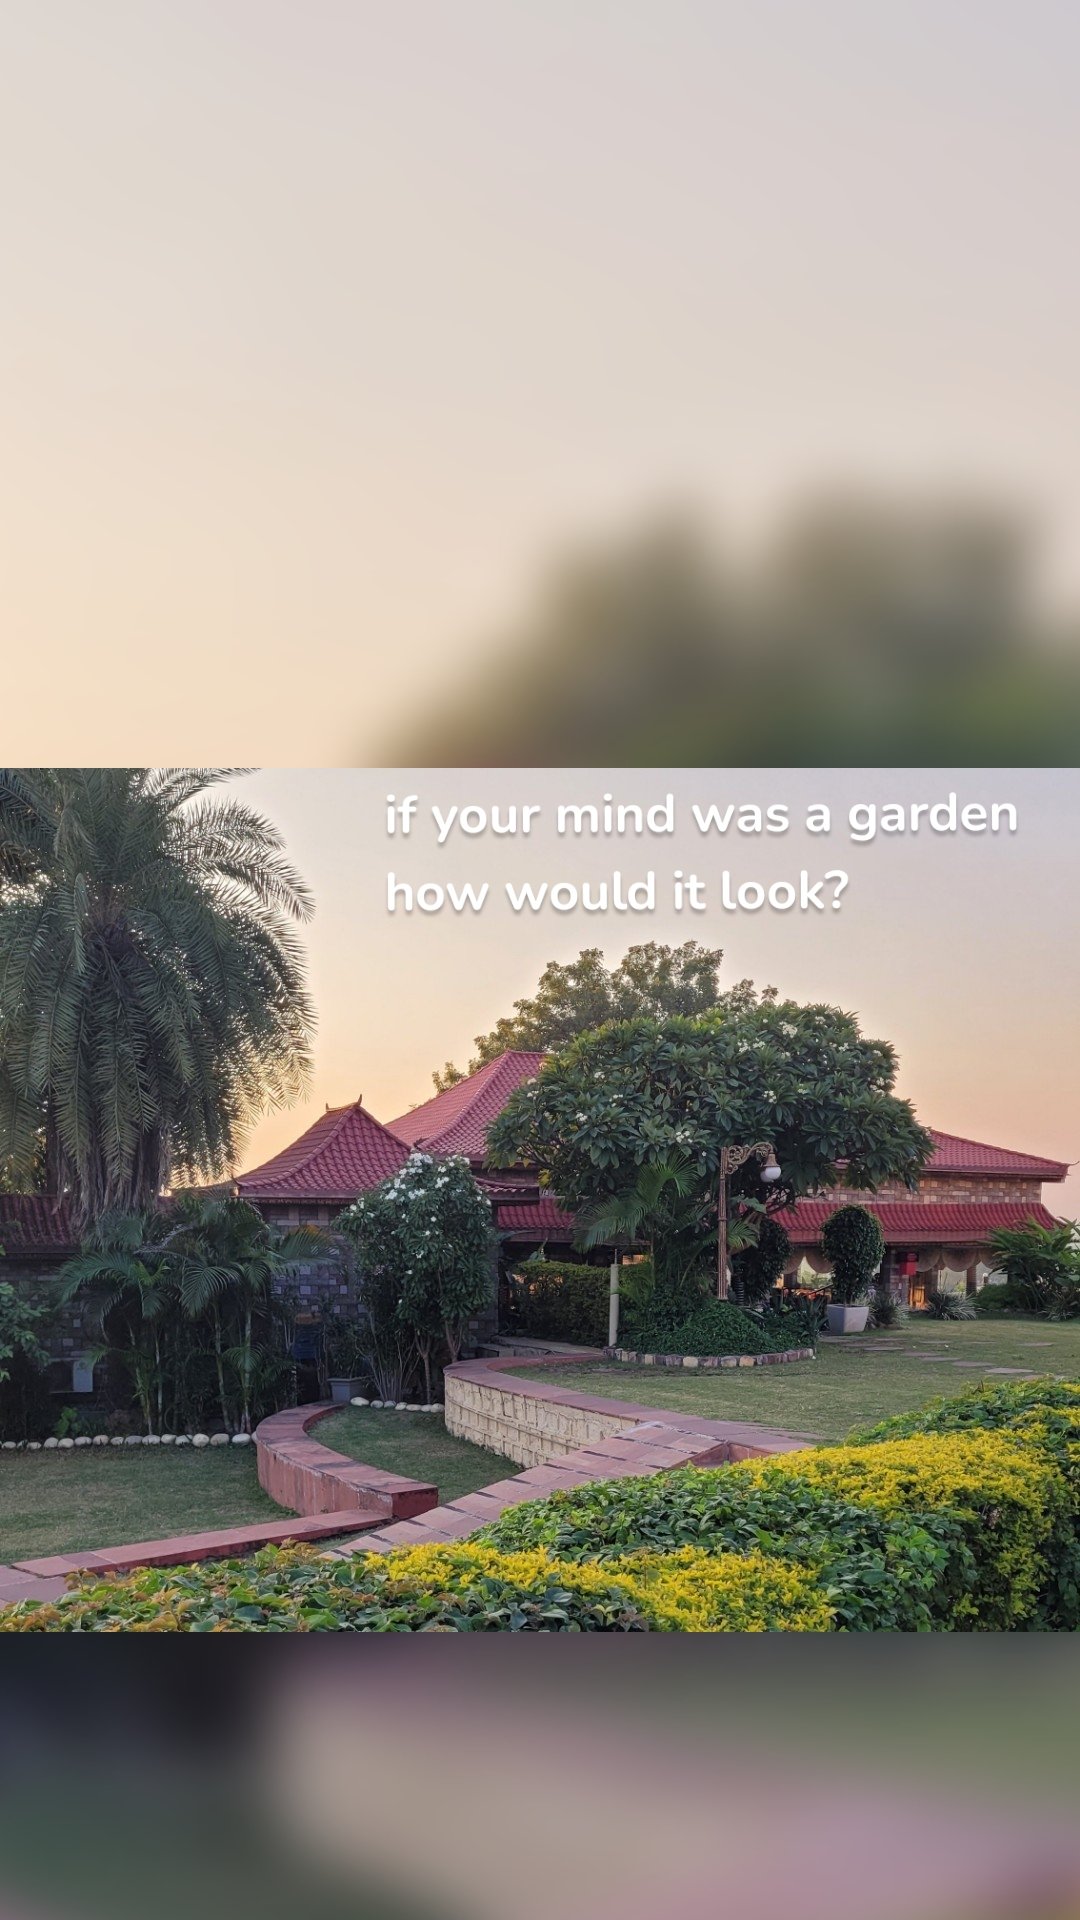 if your mind was a garden
how would it look?